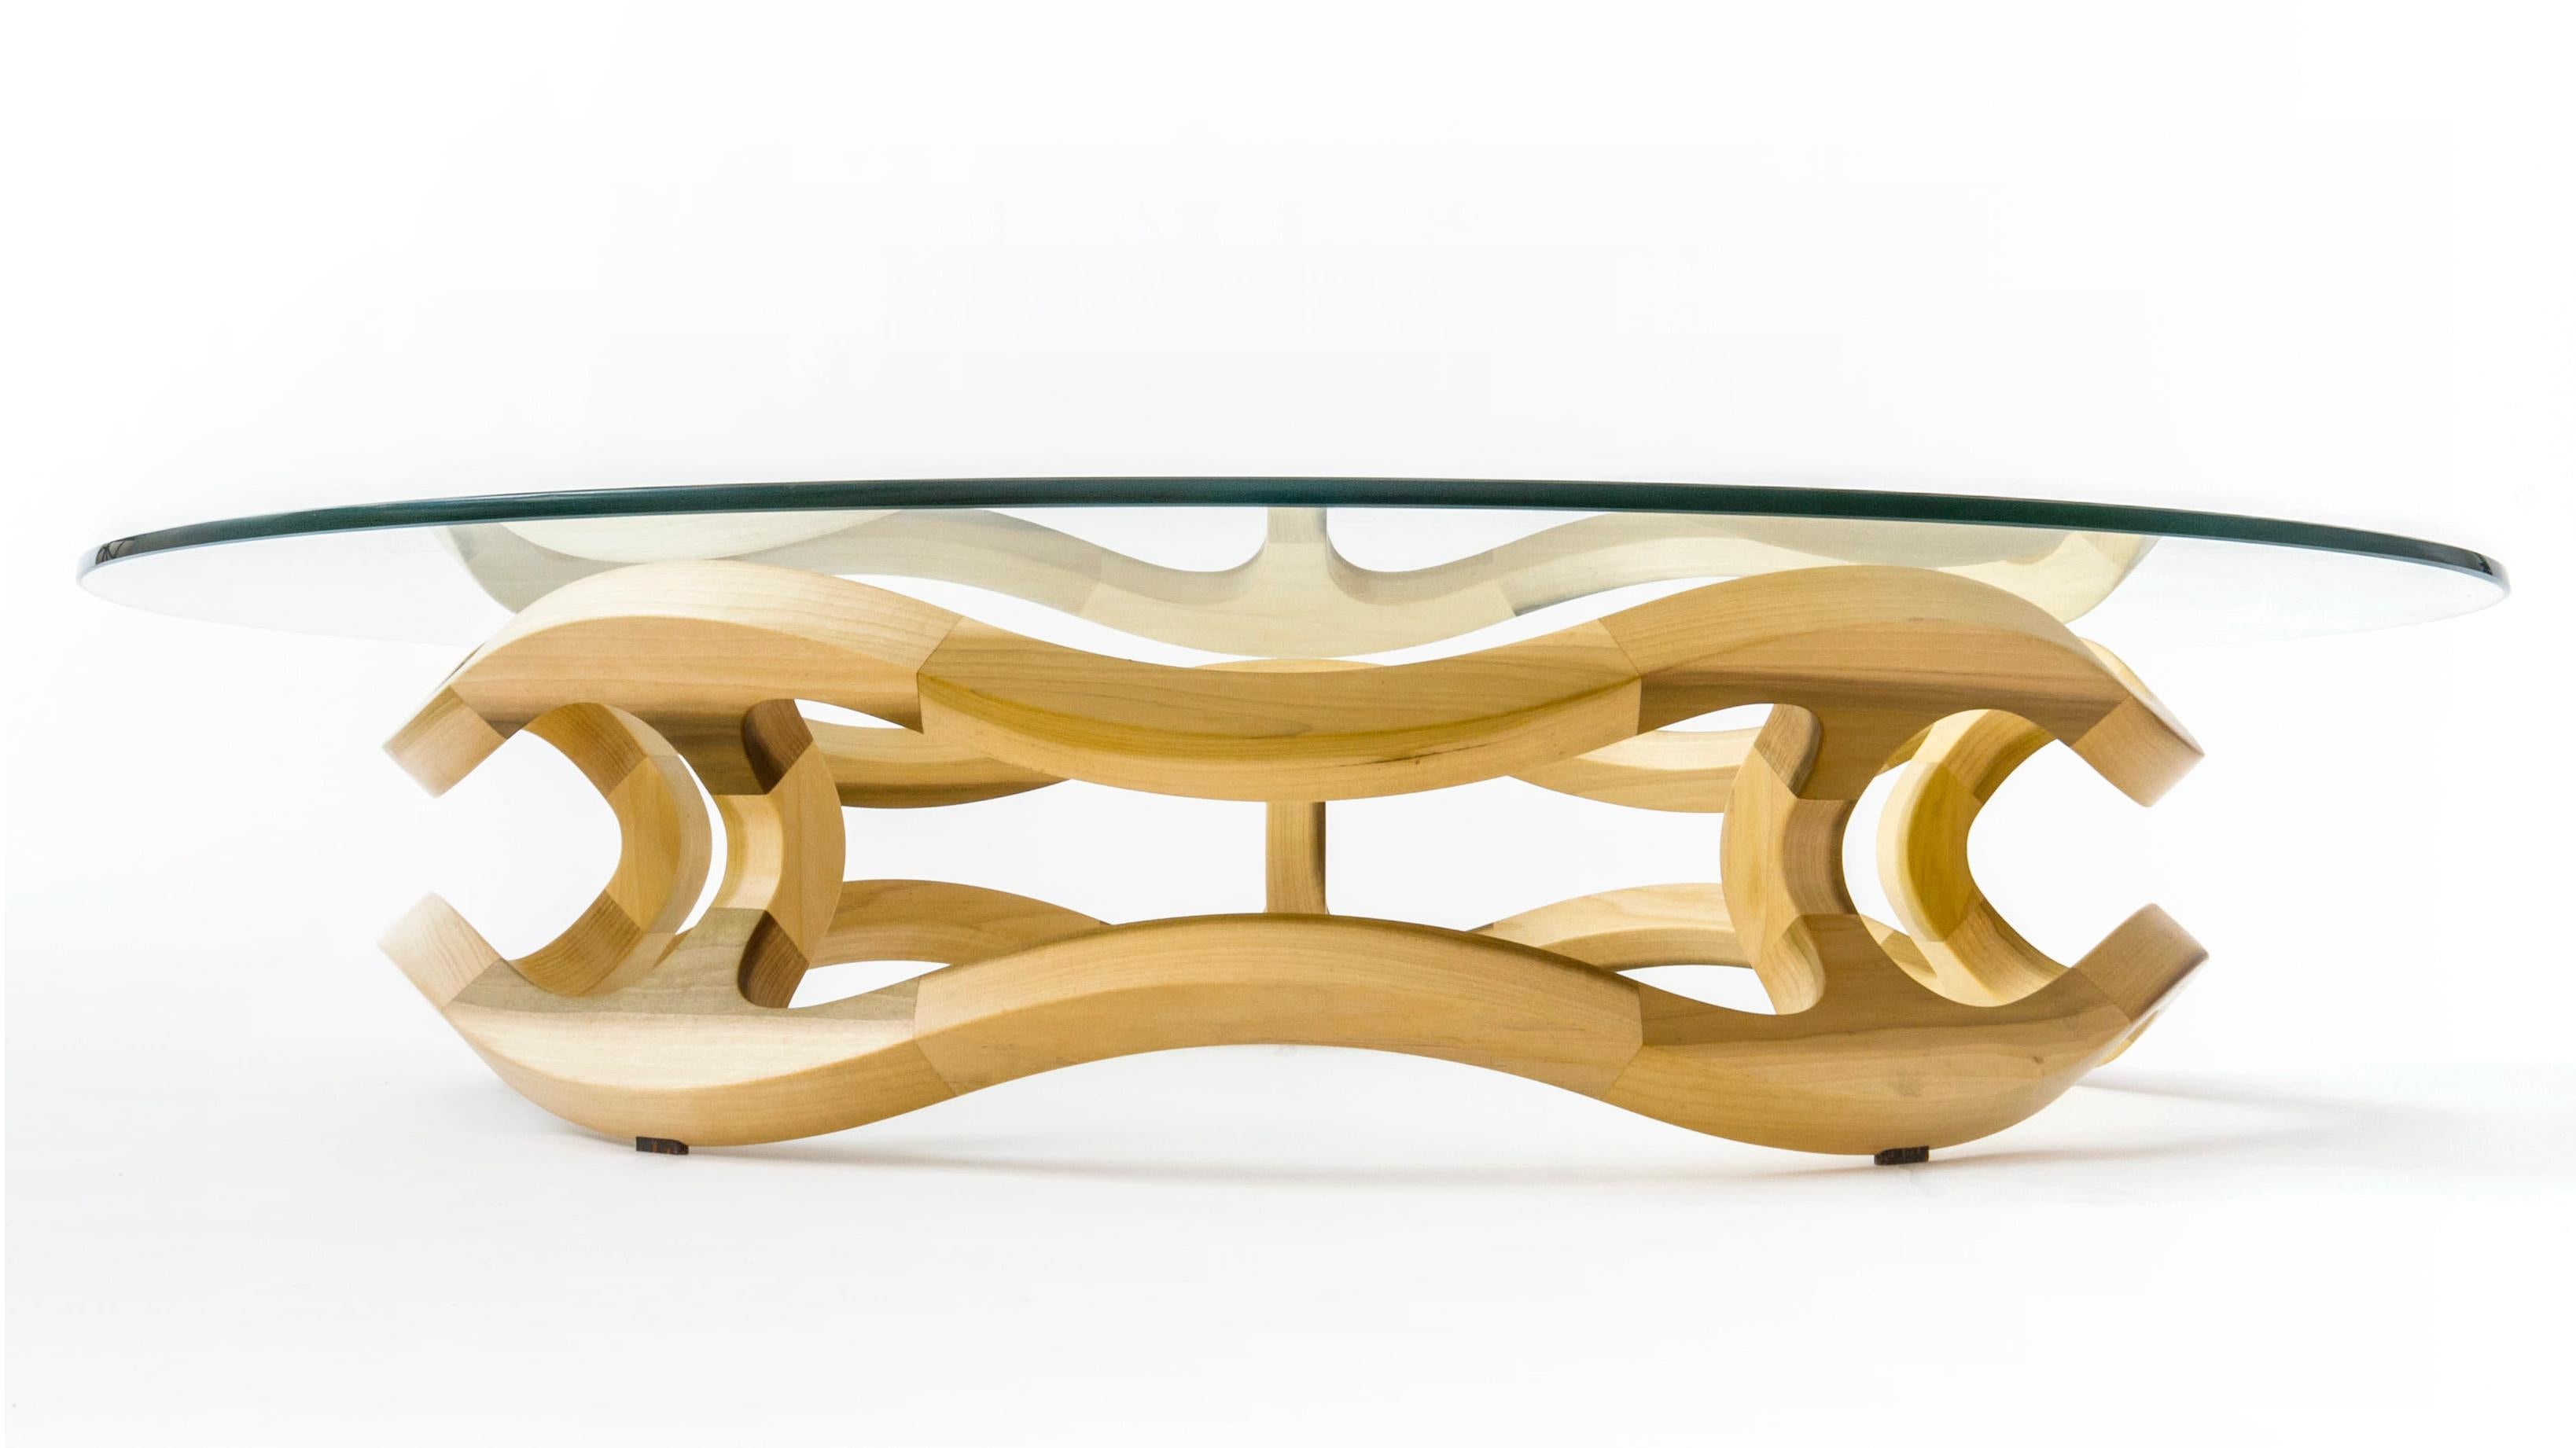 Flamenca, Geometric Sculptural Center Table Made of Solid Wood by Pedro Cerisola For Sale 6